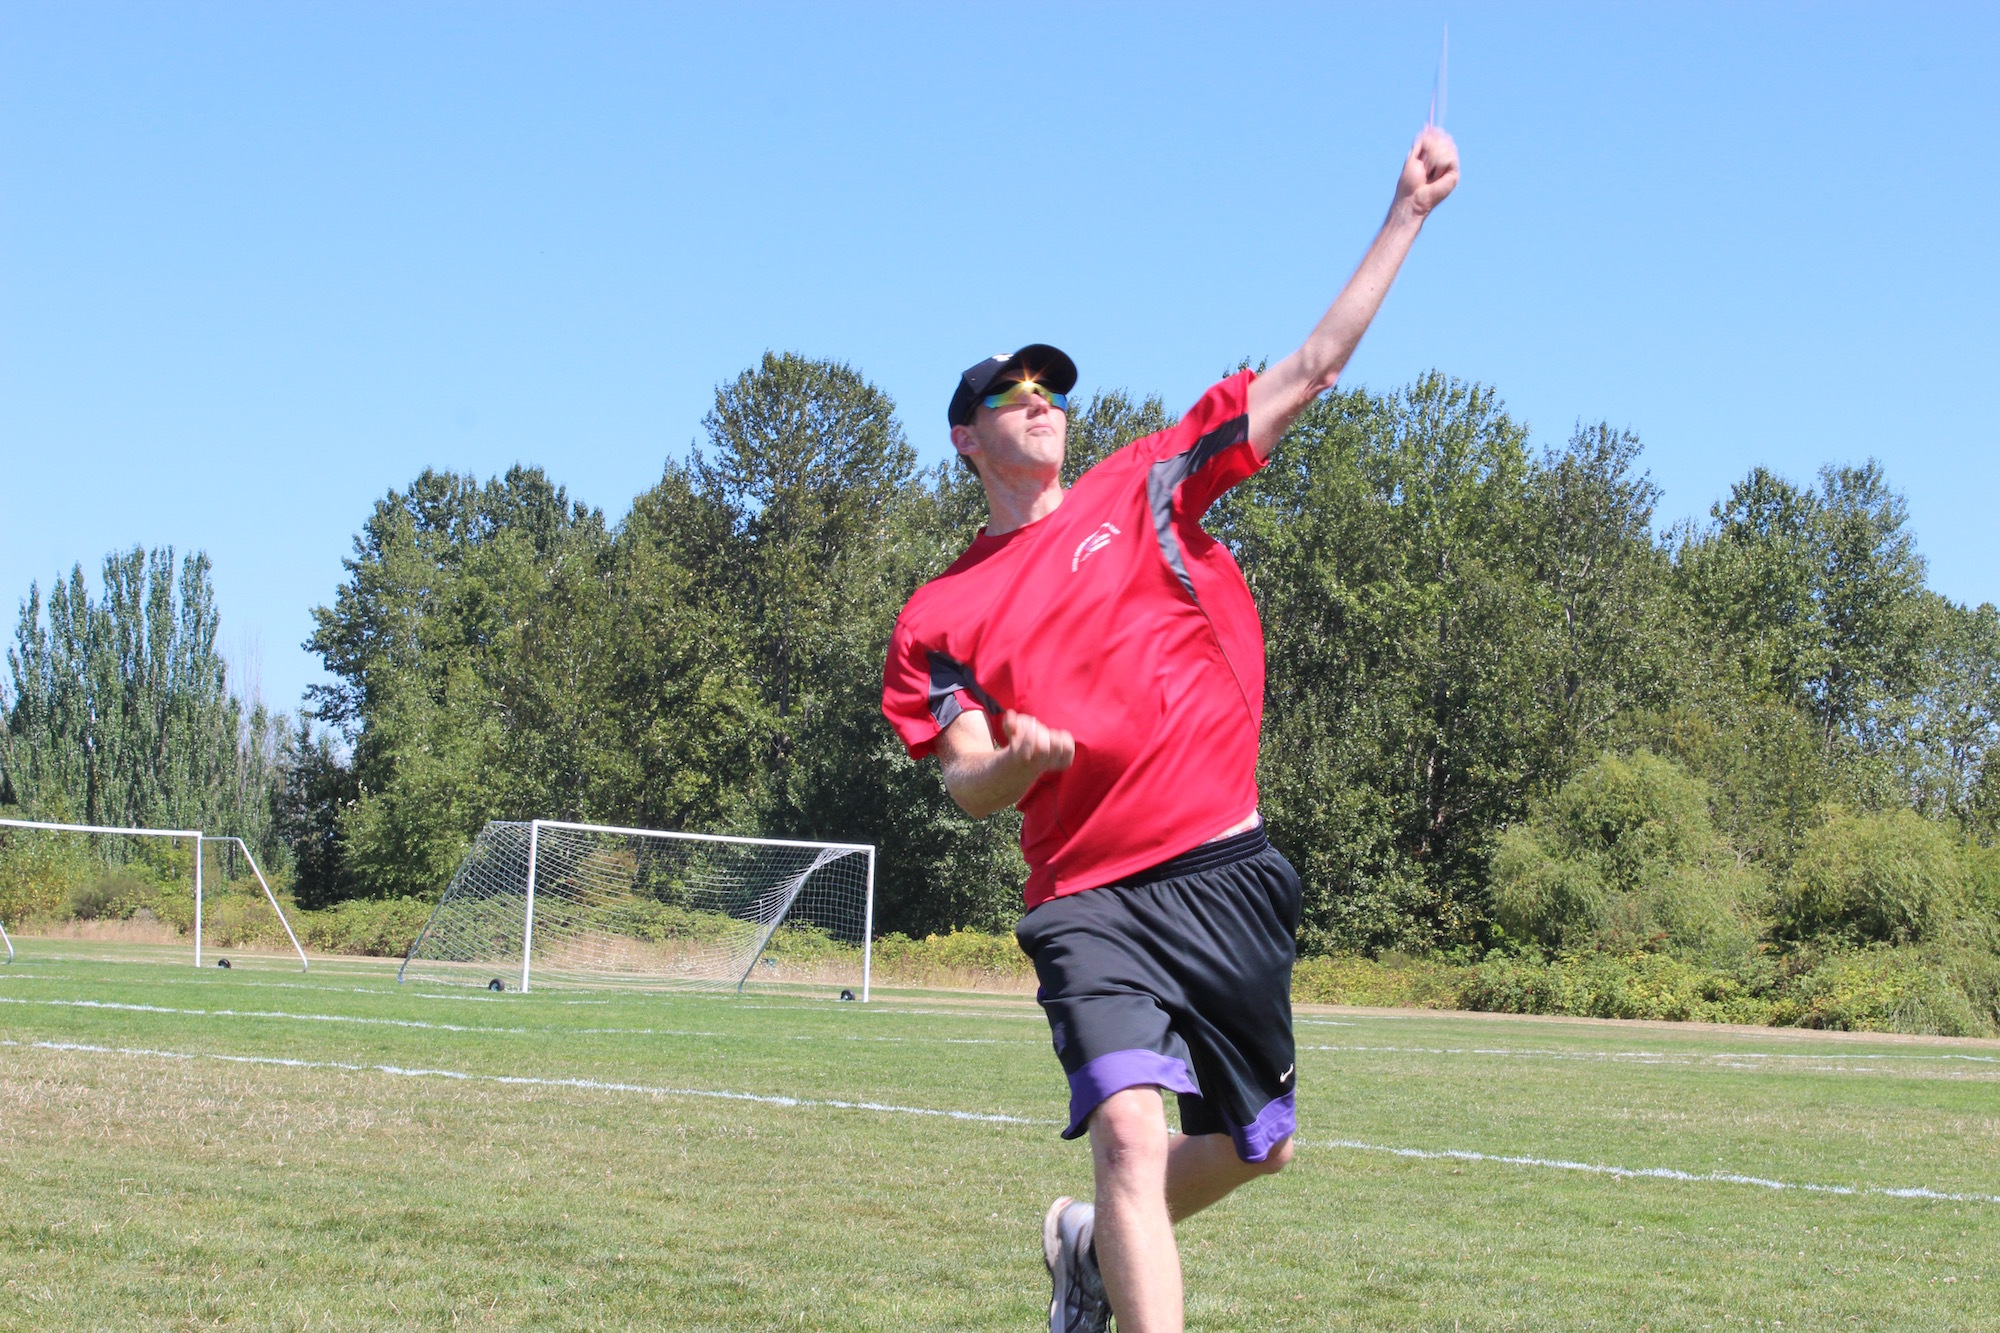 Seattle’s Boomerang Throwers: Returning Champs